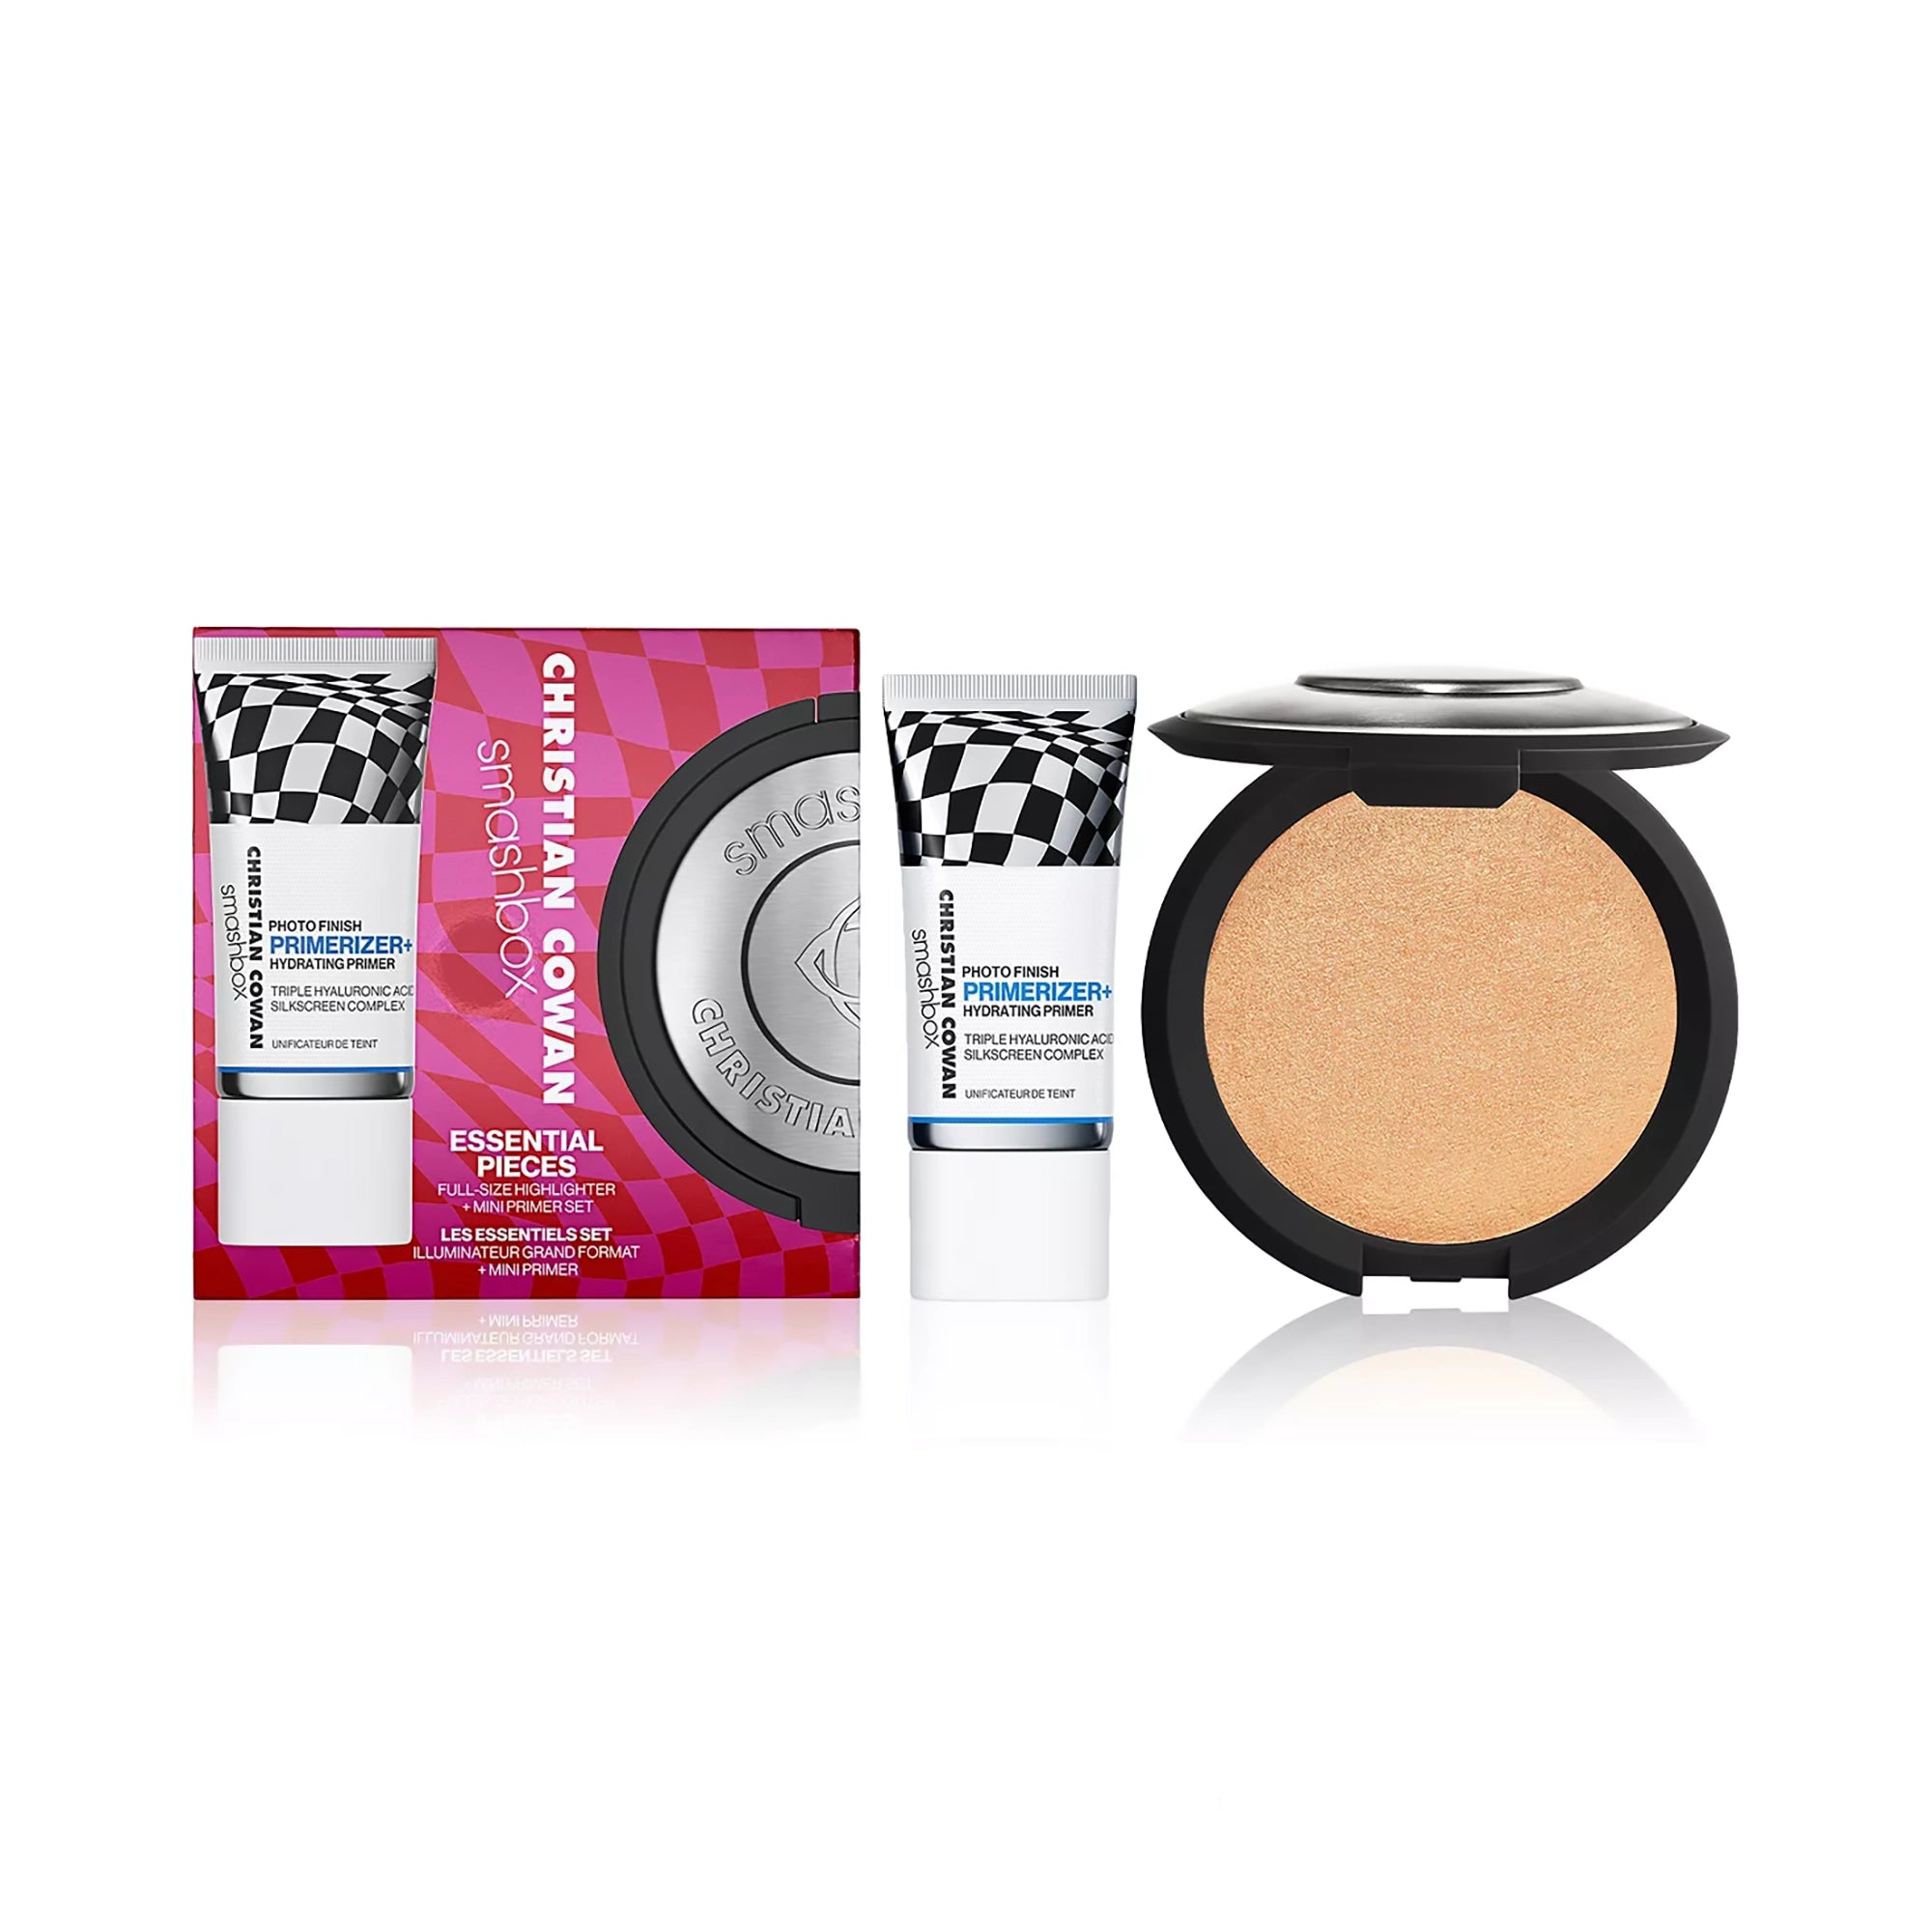 Smashbox Holiday Christian Cowan Essential Pieces Full-Size Highlighter + Mini Primer Set